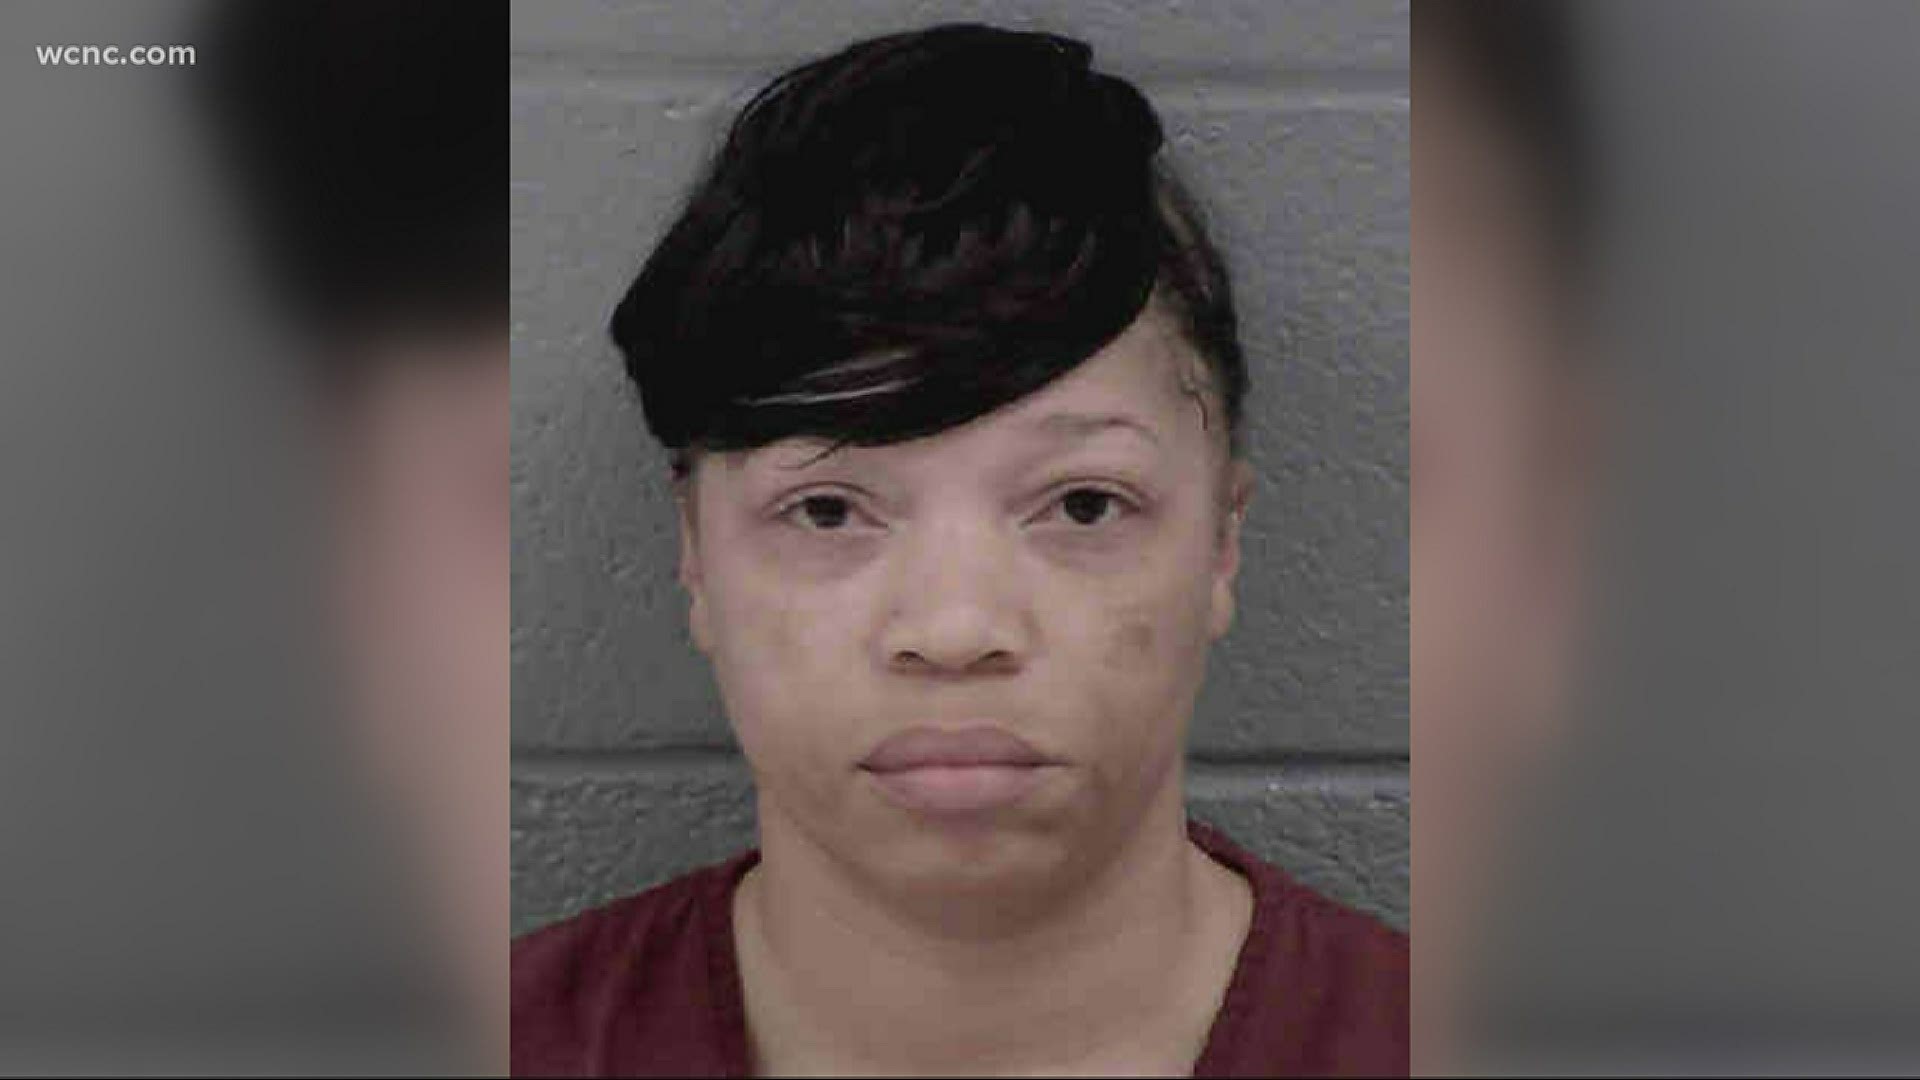 The latest on the caregiver who has now been charged with neglect after a Charlotte teen was found unresponsive.